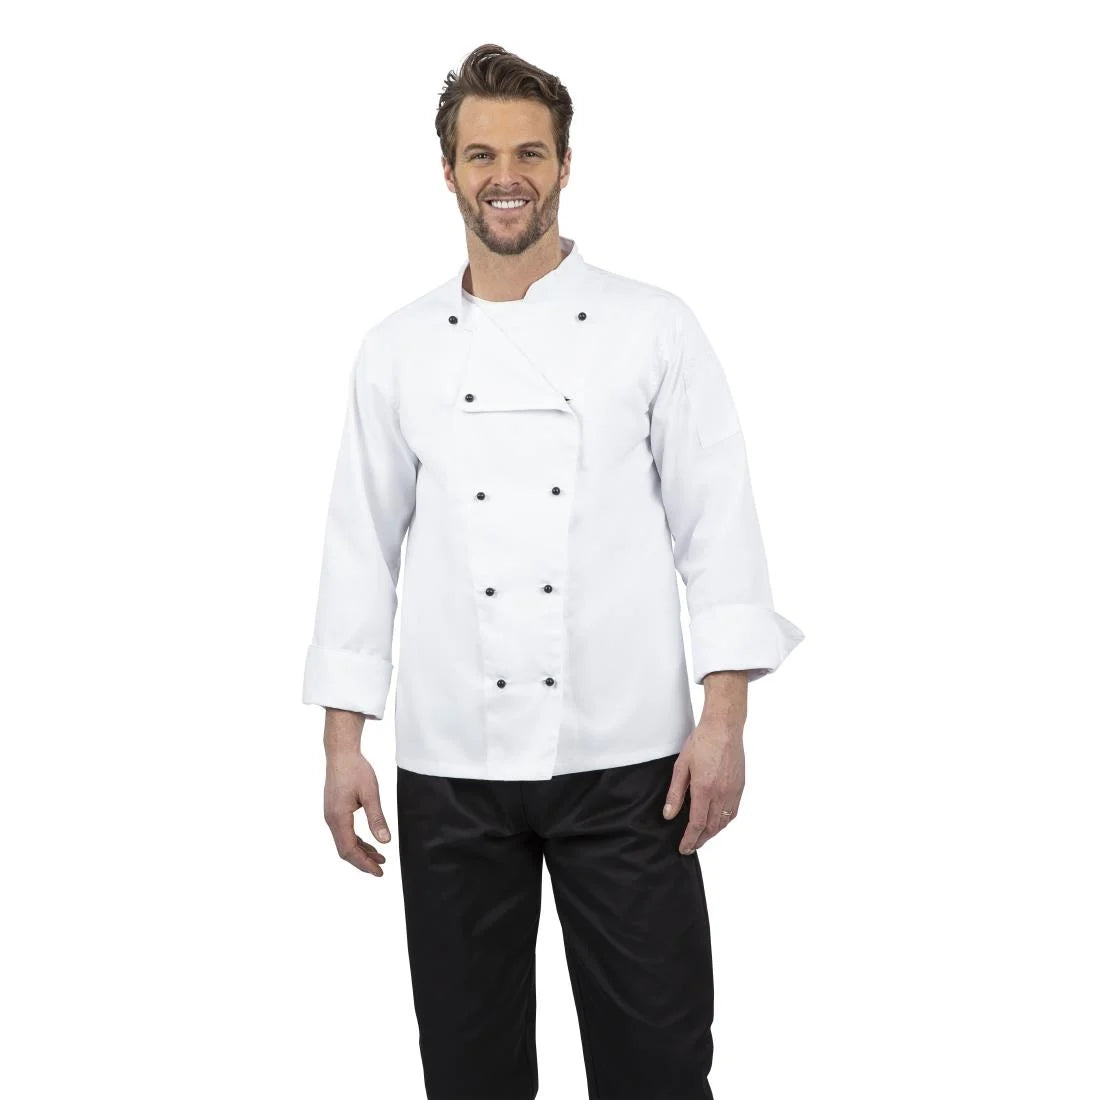 DL710-S Whites Chicago Unisex Chefs Jacket Long Sleeve S JD Catering Equipment Solutions Ltd